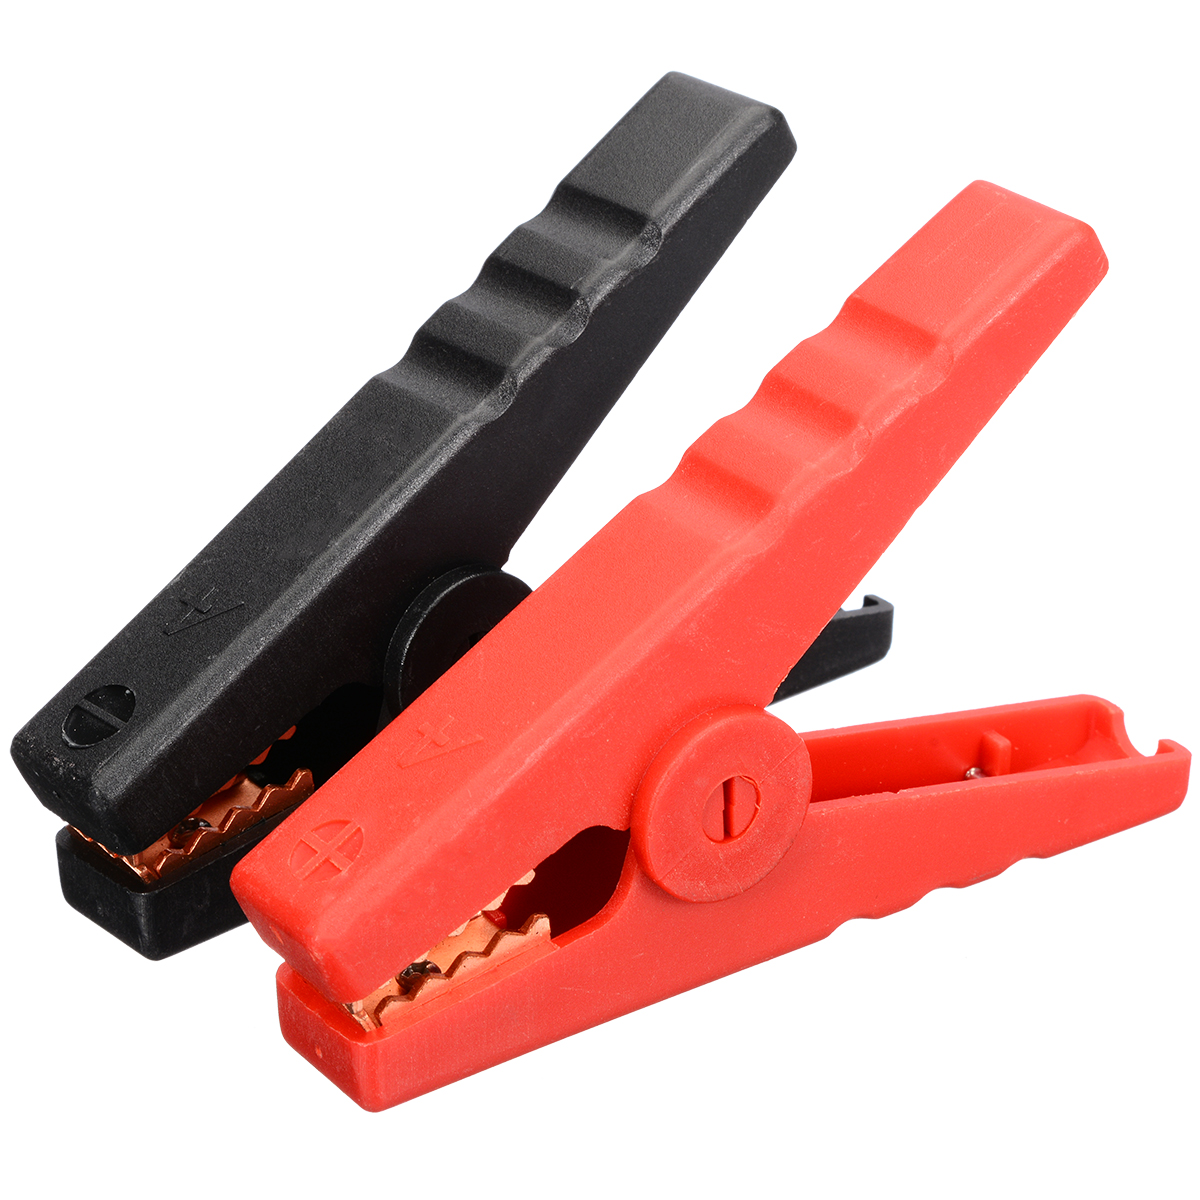 2pcs Metal Auto Car Insulated Alligator Clip Battery Crocodile Clamps Power Tool 